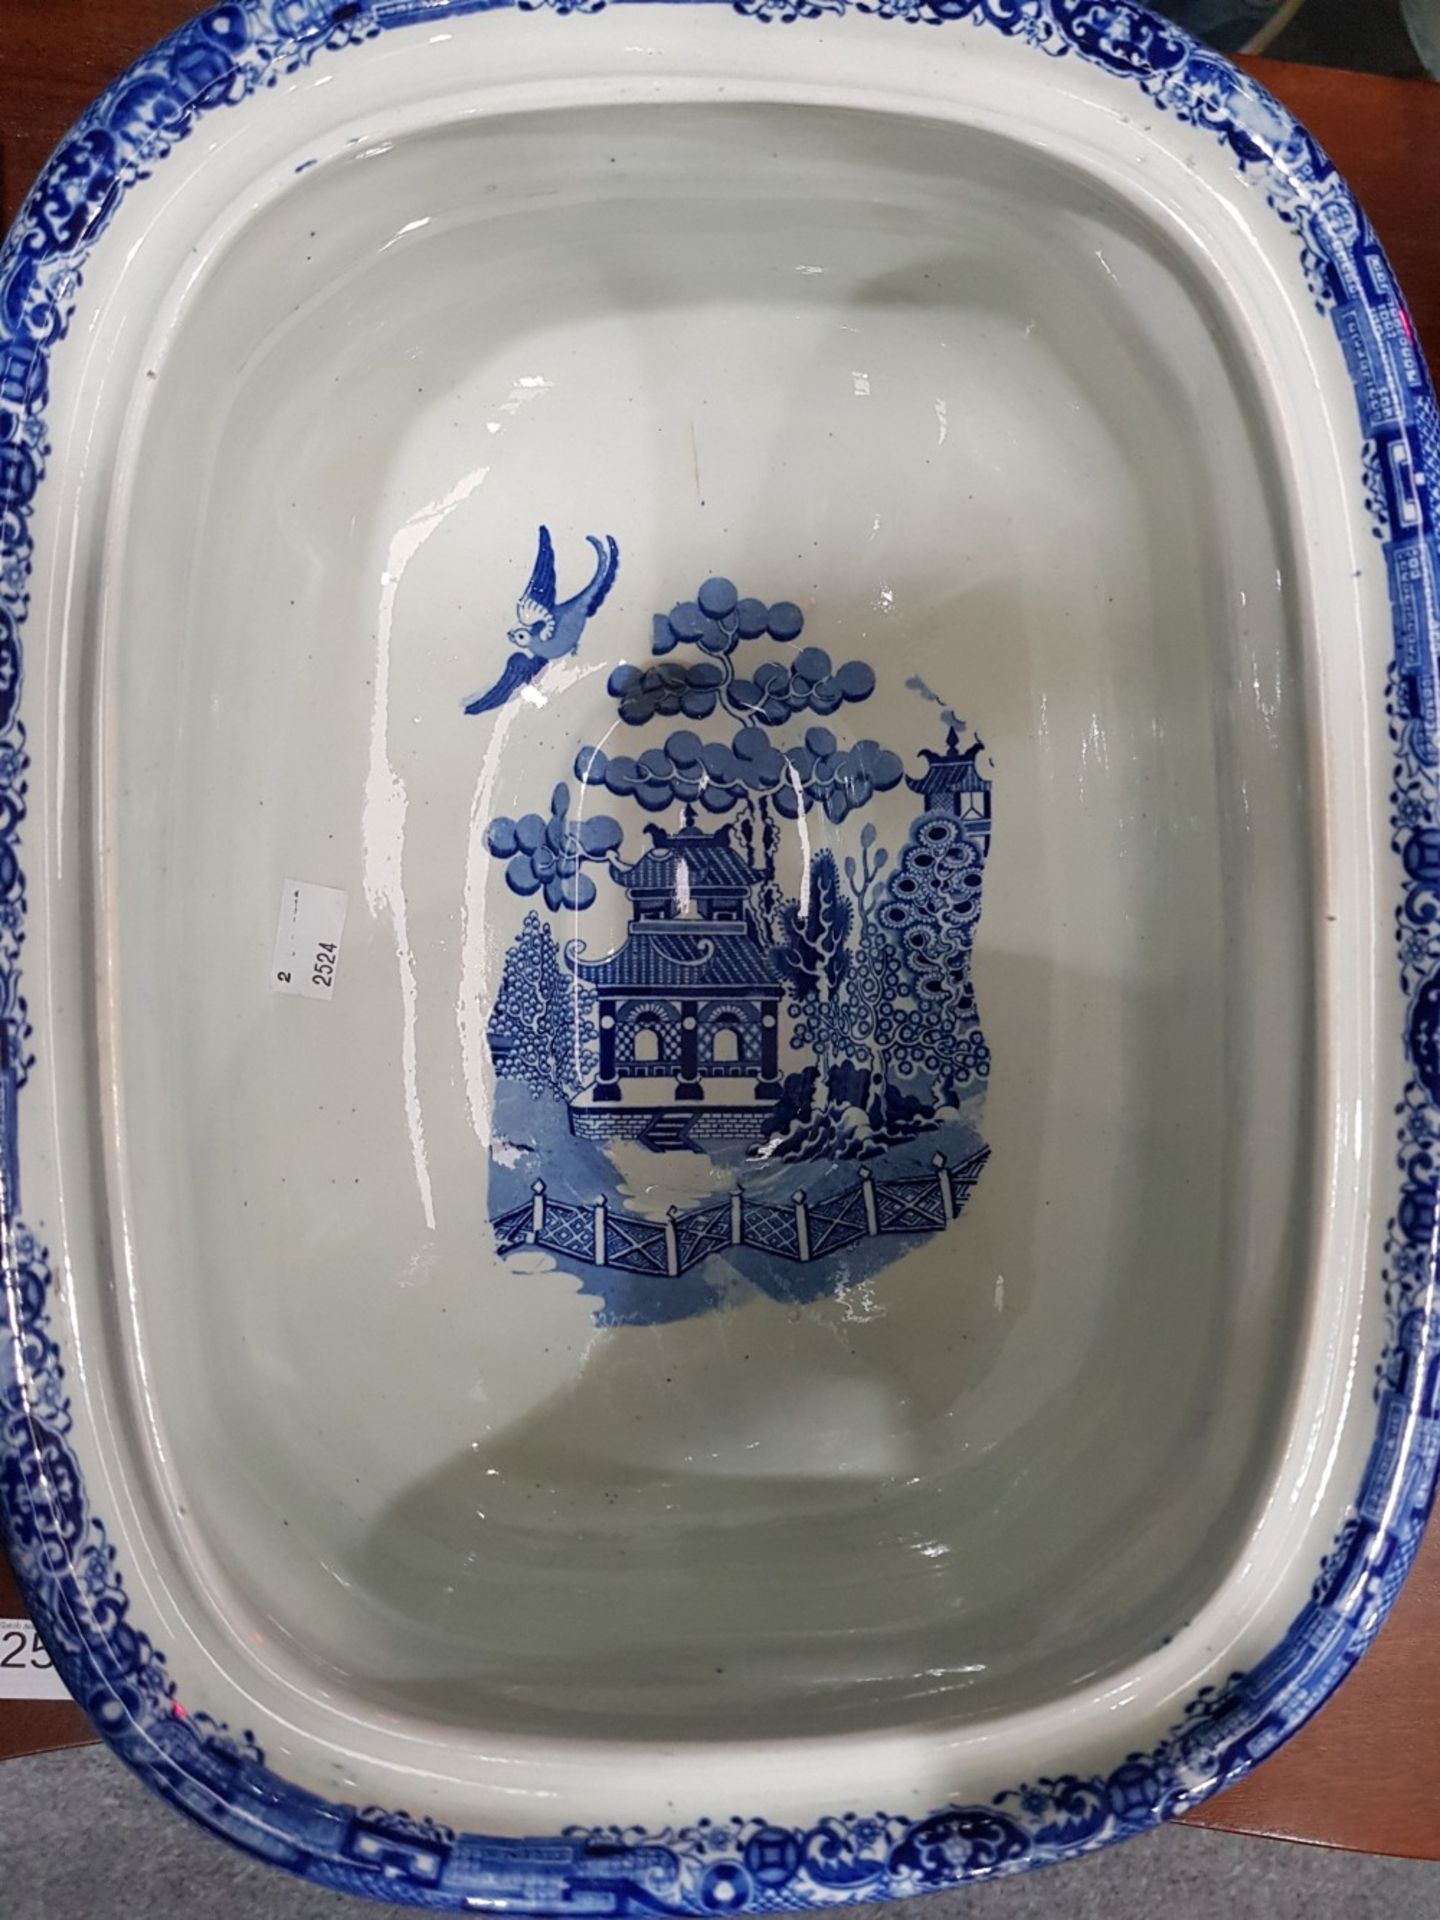 AN EARLY 19TH CENTURY NEWCASTLE WILLOW PATTERN TUREEN - Image 5 of 6